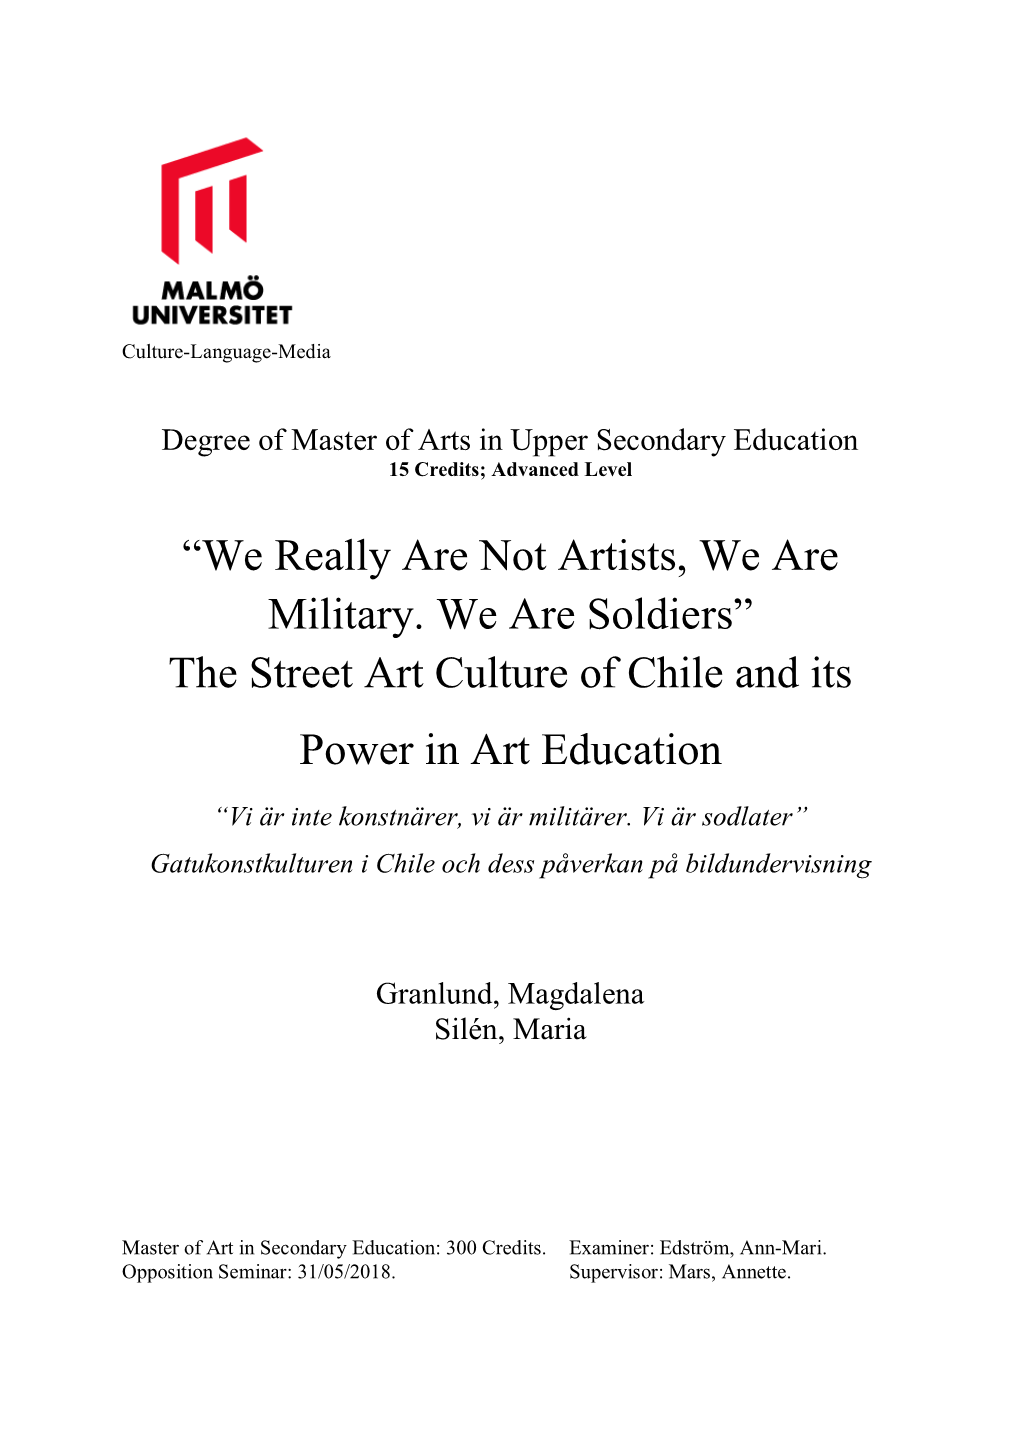 The Street Art Culture of Chile and Its Power in Art Education